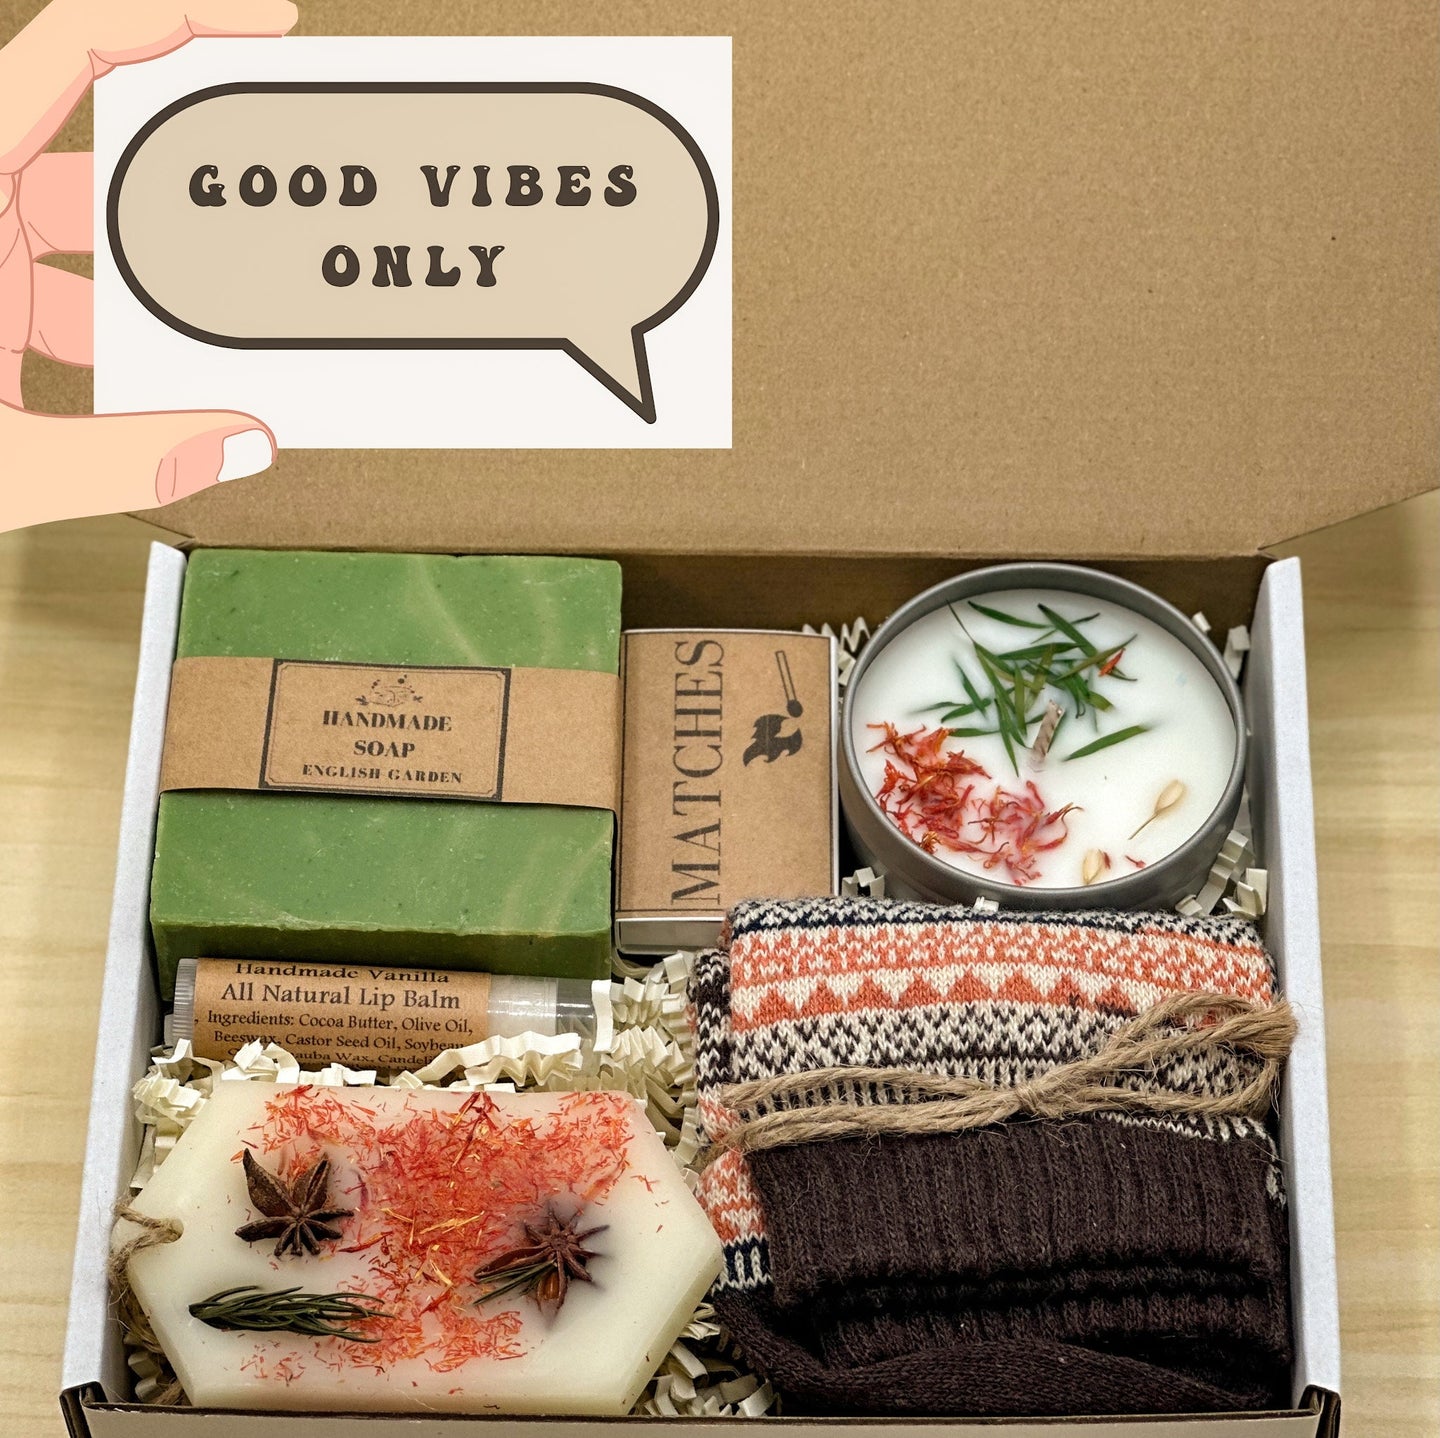 Get Well Care Package for Women - Gift Good Vibes